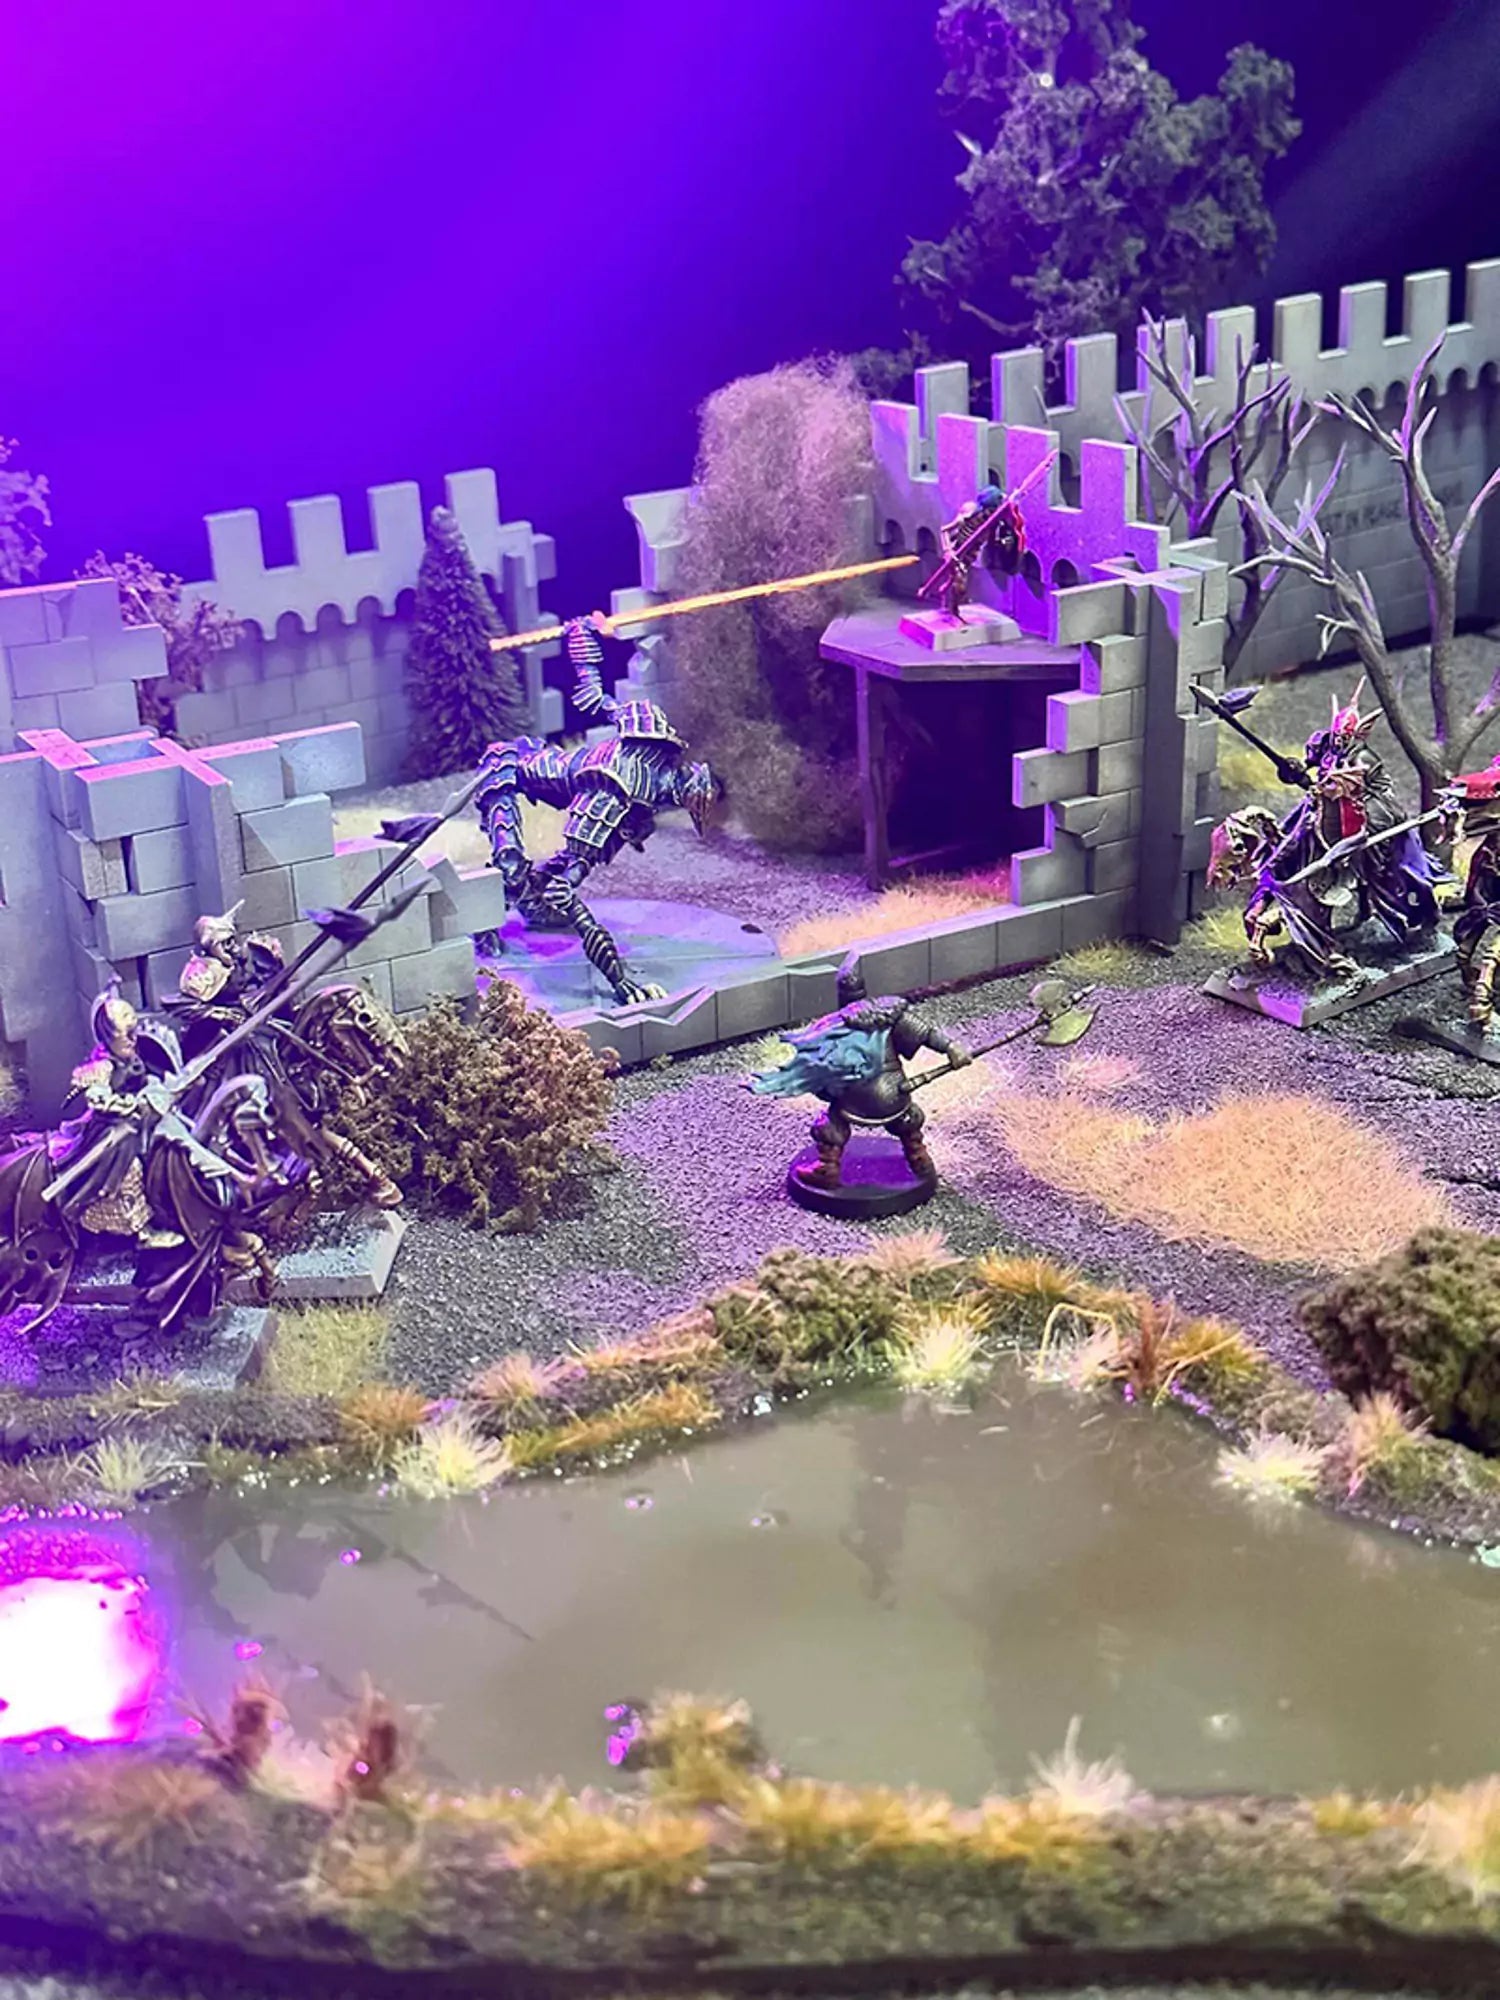 undead miniatures fighting amongst ruined wall terrain and a swamp